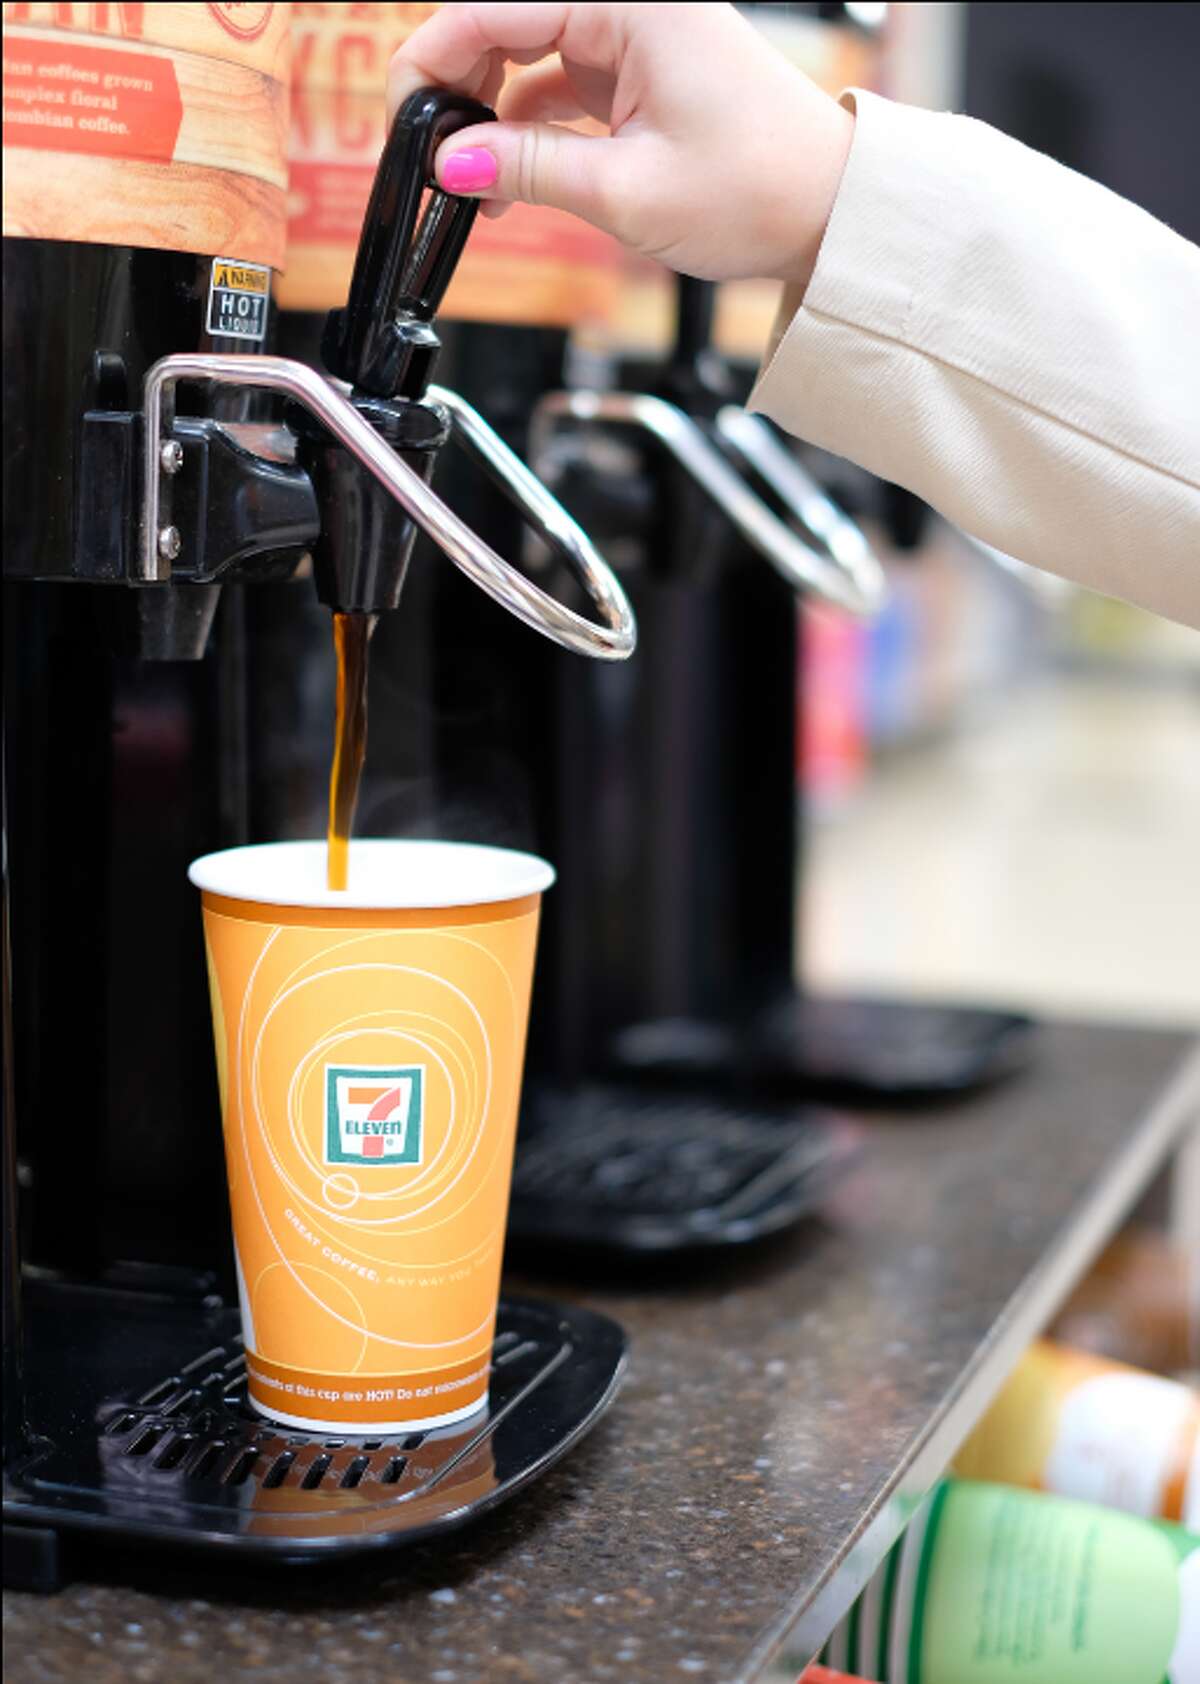 7-Eleven Even the chain of convenience stores is getting in on the action. All 7-Elevens scattered throughout the city are doling out a $1 any size coffee through the free 7Rewards app.